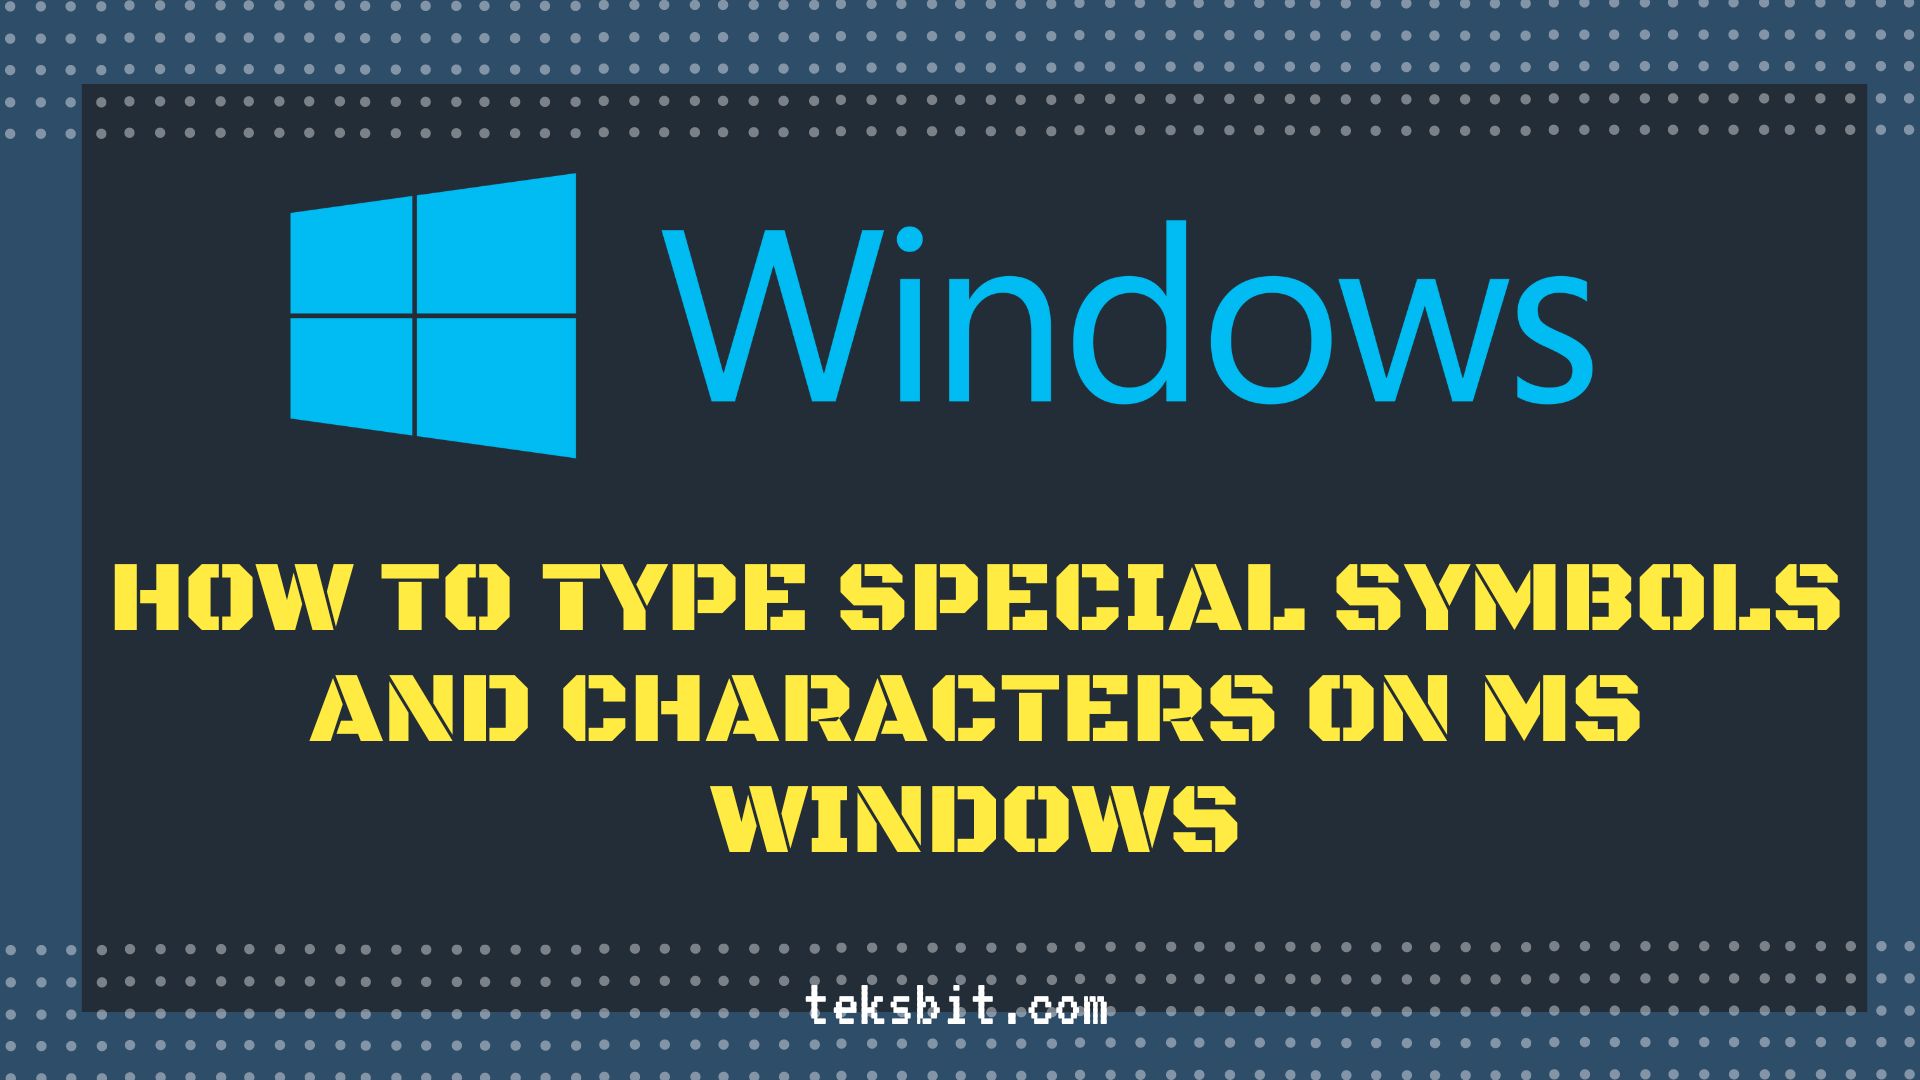 How to Type Special Symbols and Characters on MS Windows